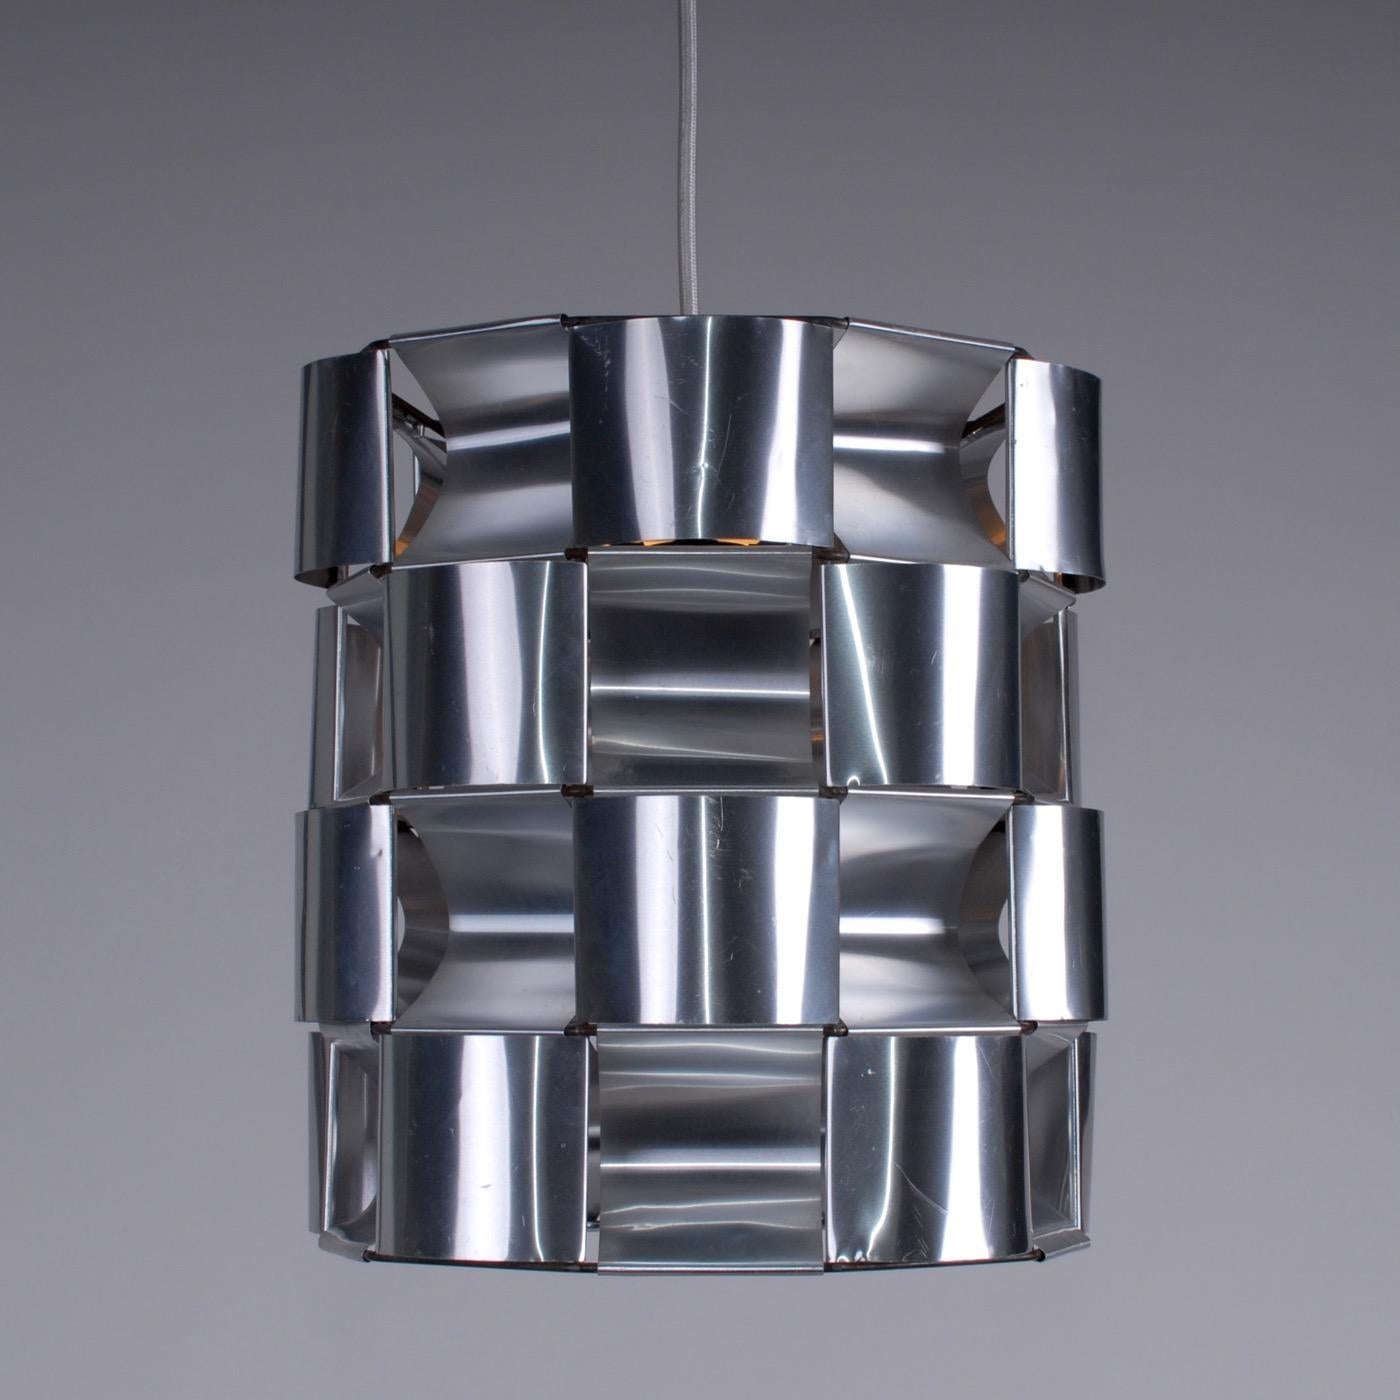 French Space Age Max Sauze aluminium silver Ceiling lamp 1970s early production. 
Ceiling lamp manufactured at Max Sauze workshops consisting of aluminium sheets stretched on a steel grid. Partly hand made at Sauze in France. Newly wired with